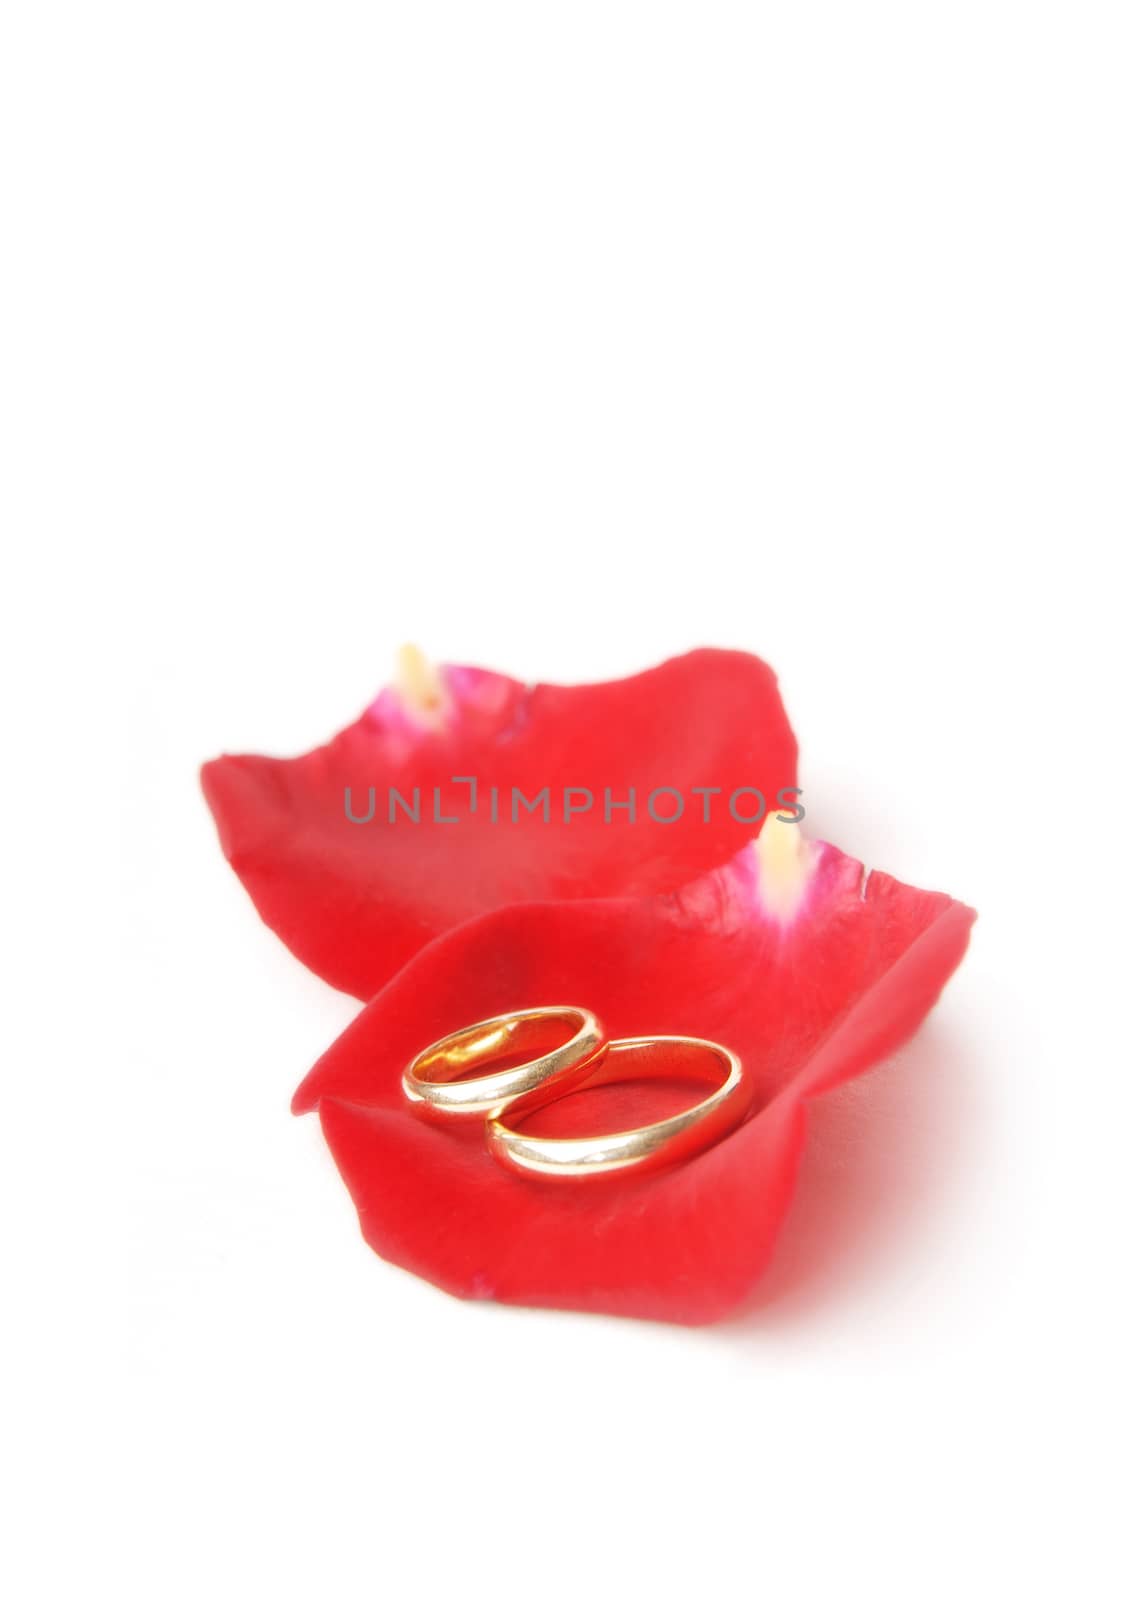 Wedding rings and rose petals by Novic